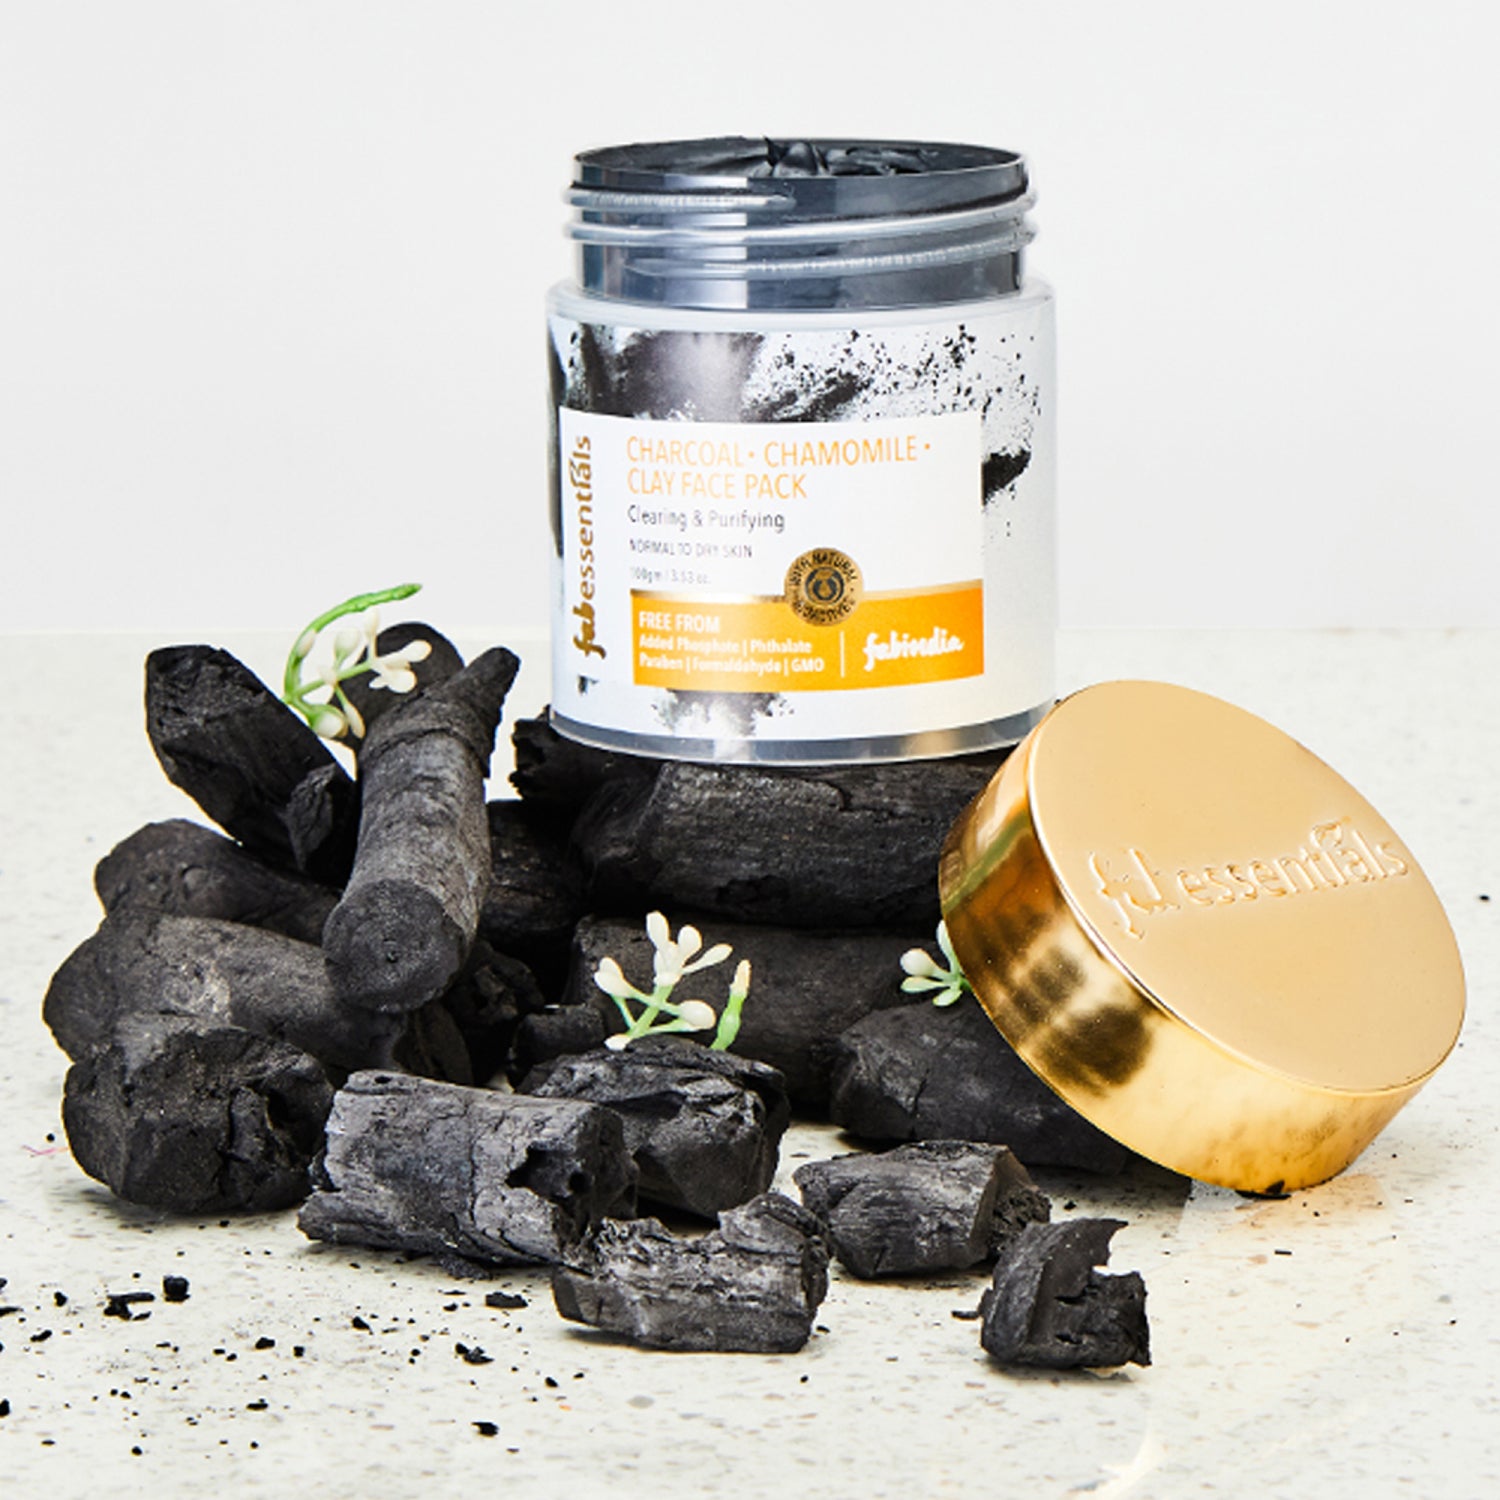 Charcoal Chamomile & Clay Face Pack - 100 gm